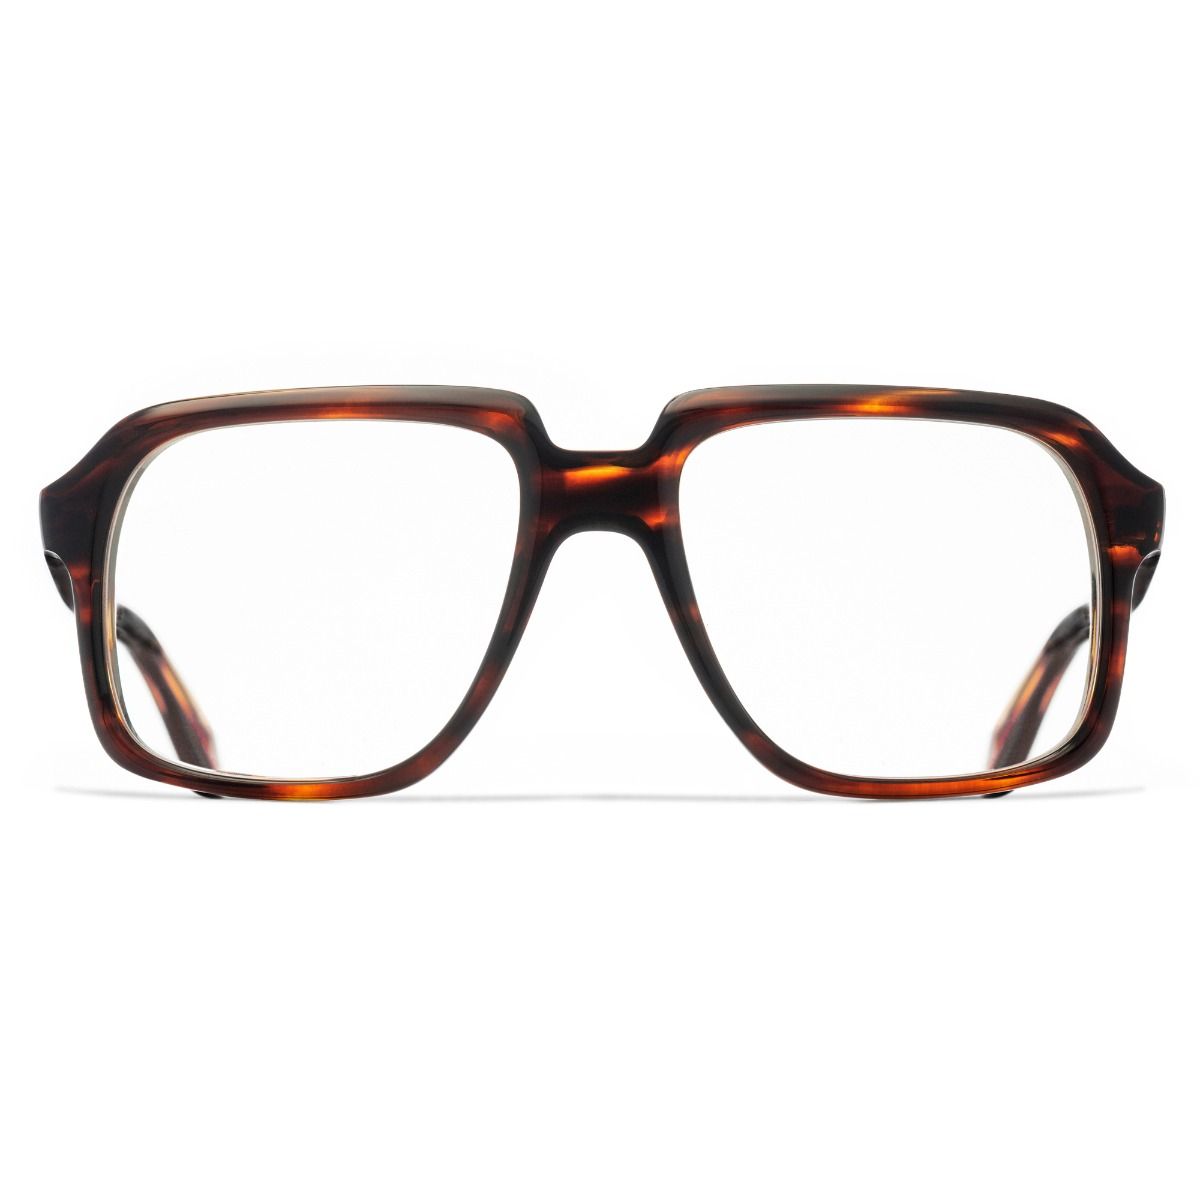 Cutler and Gross, 1397 Optical Square Glasses - Havana